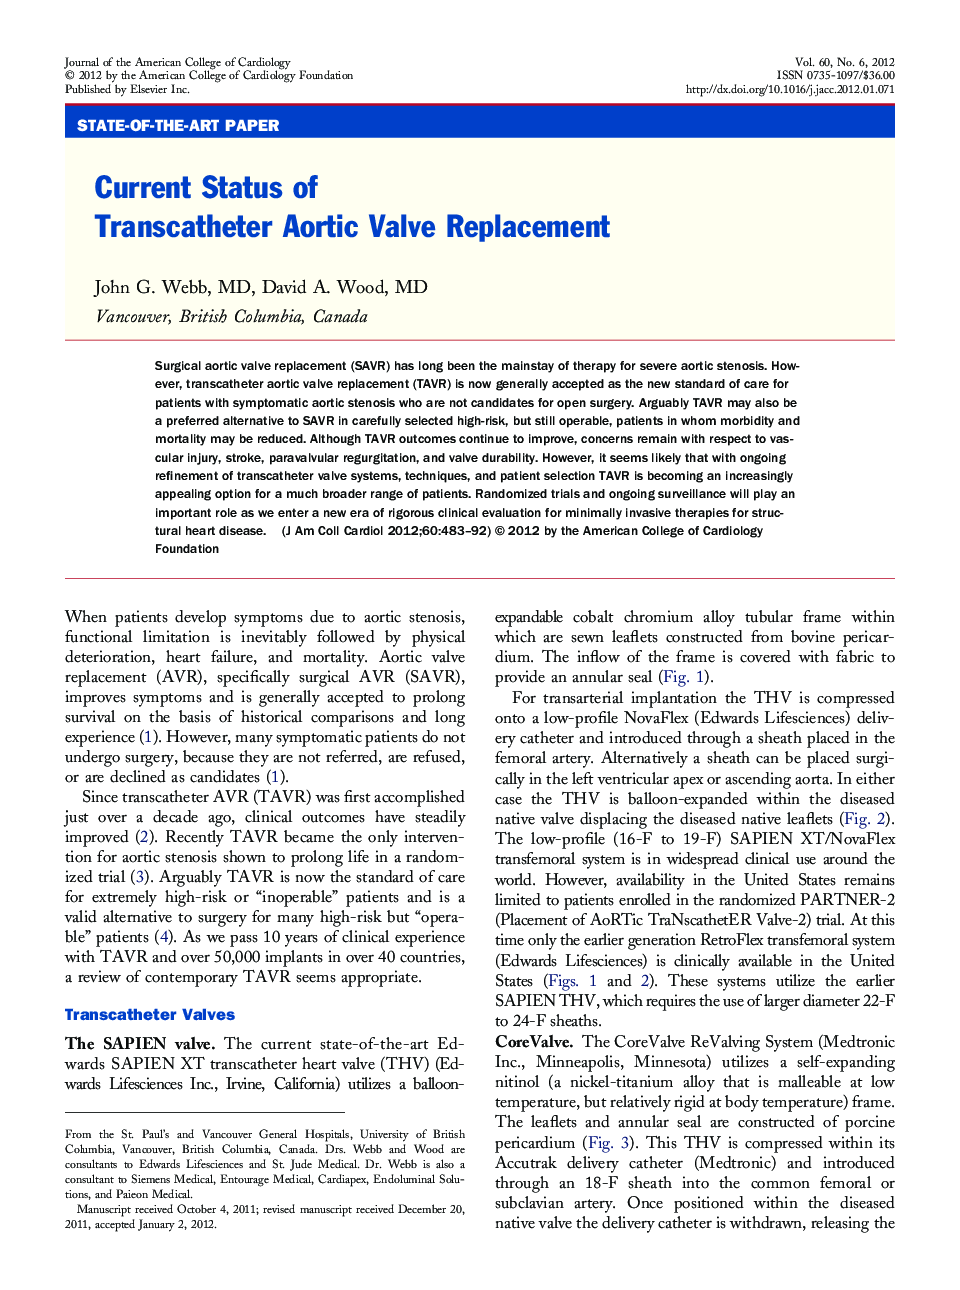 Current Status of Transcatheter Aortic Valve Replacement 